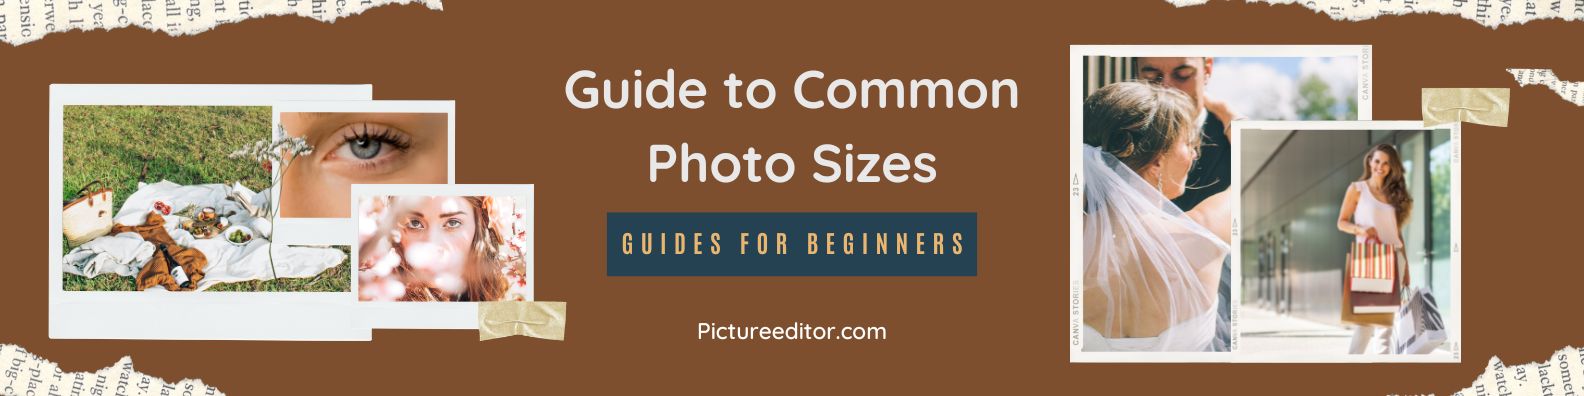 Guide to Common Photo Sizes